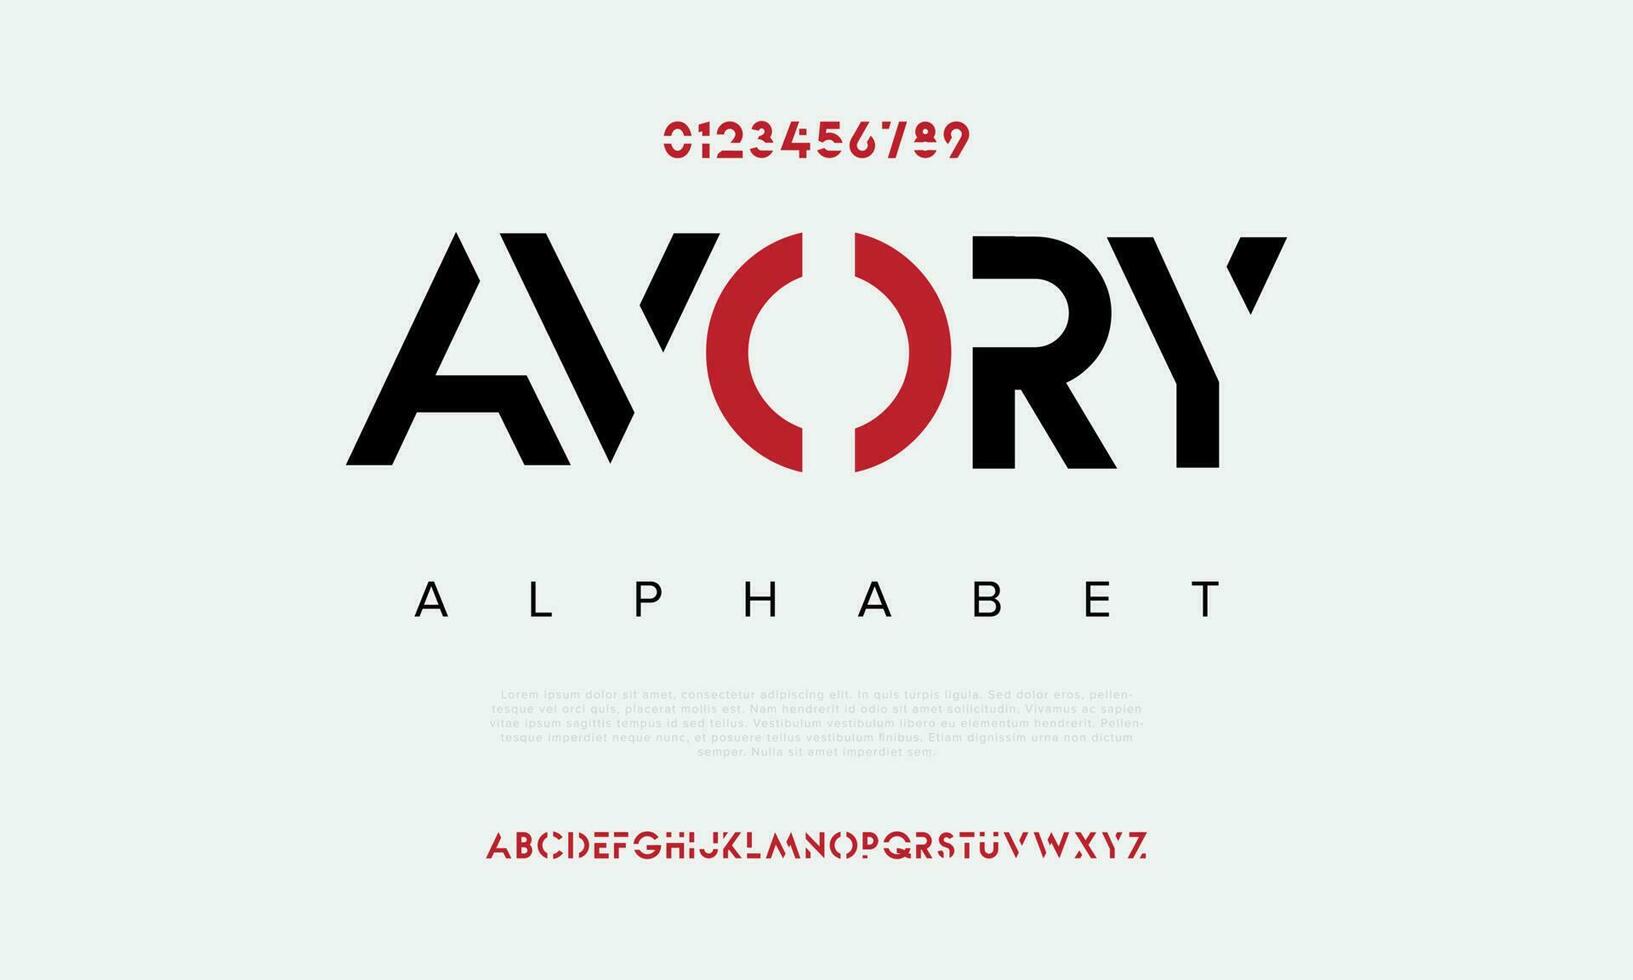 Avory abstract digital technology logo font alphabet. Minimal modern urban fonts for logo, brand etc. Typography typeface uppercase lowercase and number. vector illustration